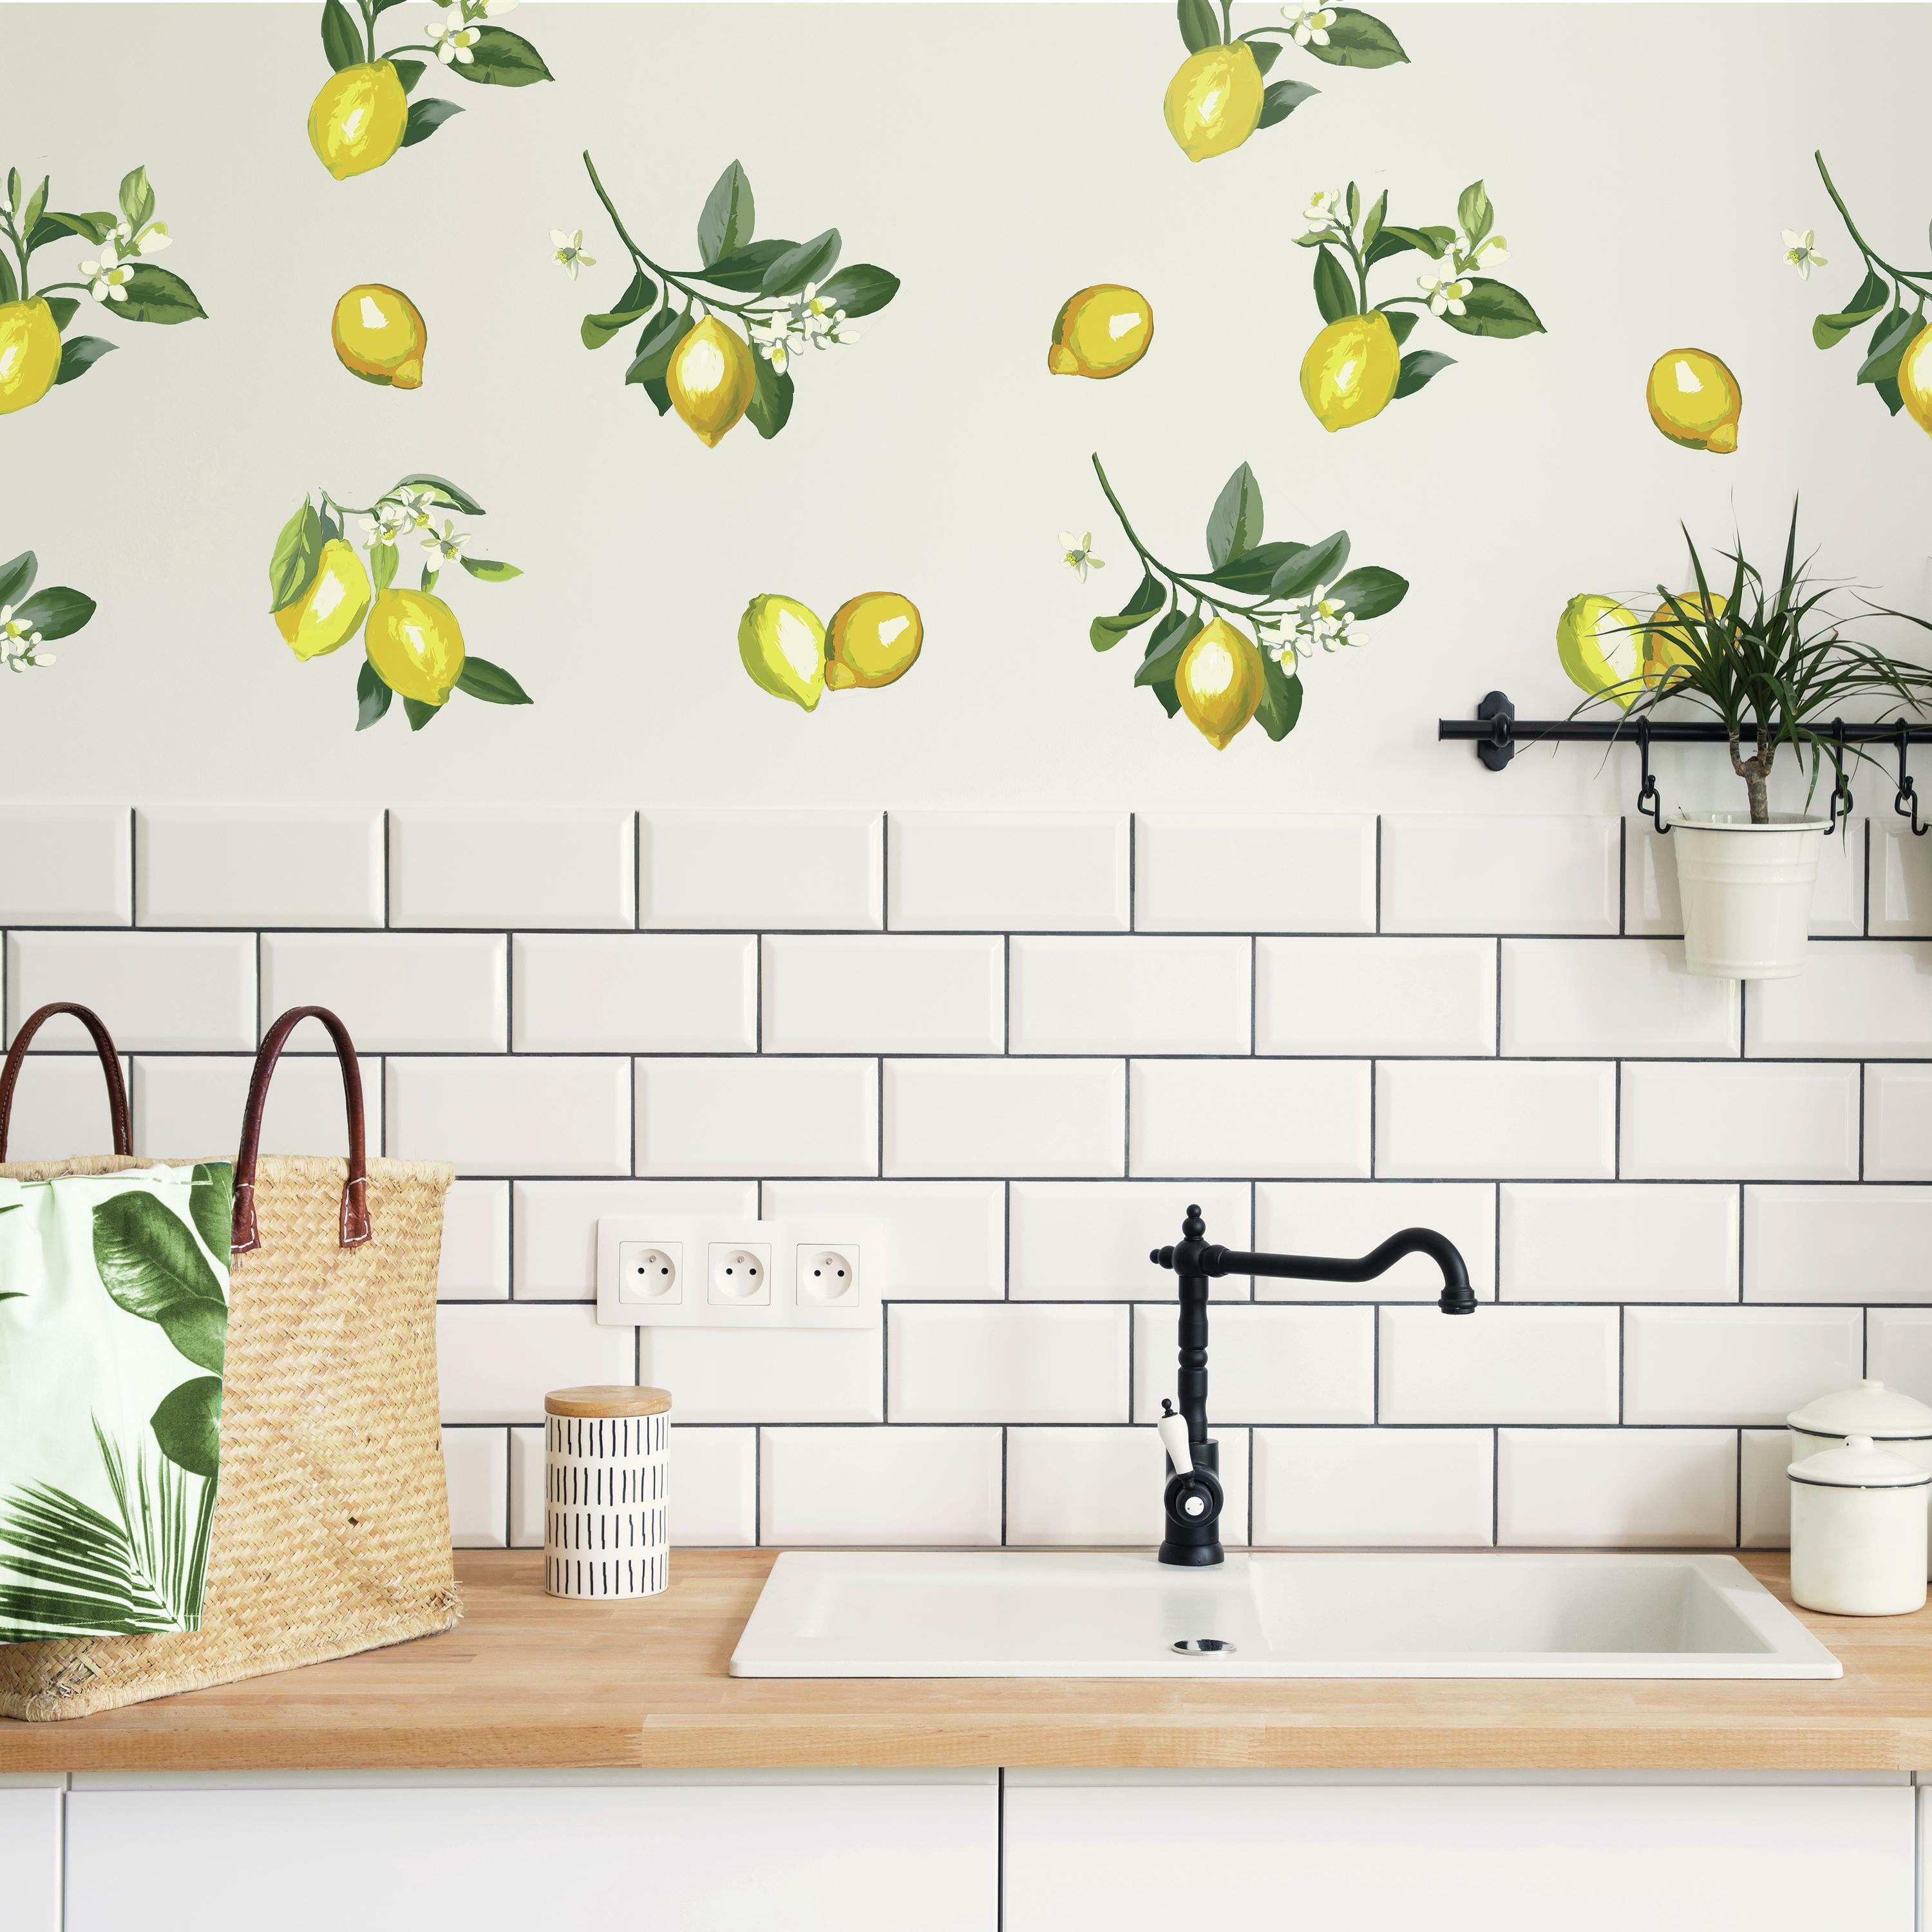 RoomMates Lemon Peel and Stick Giant Wall Decals, Yellow